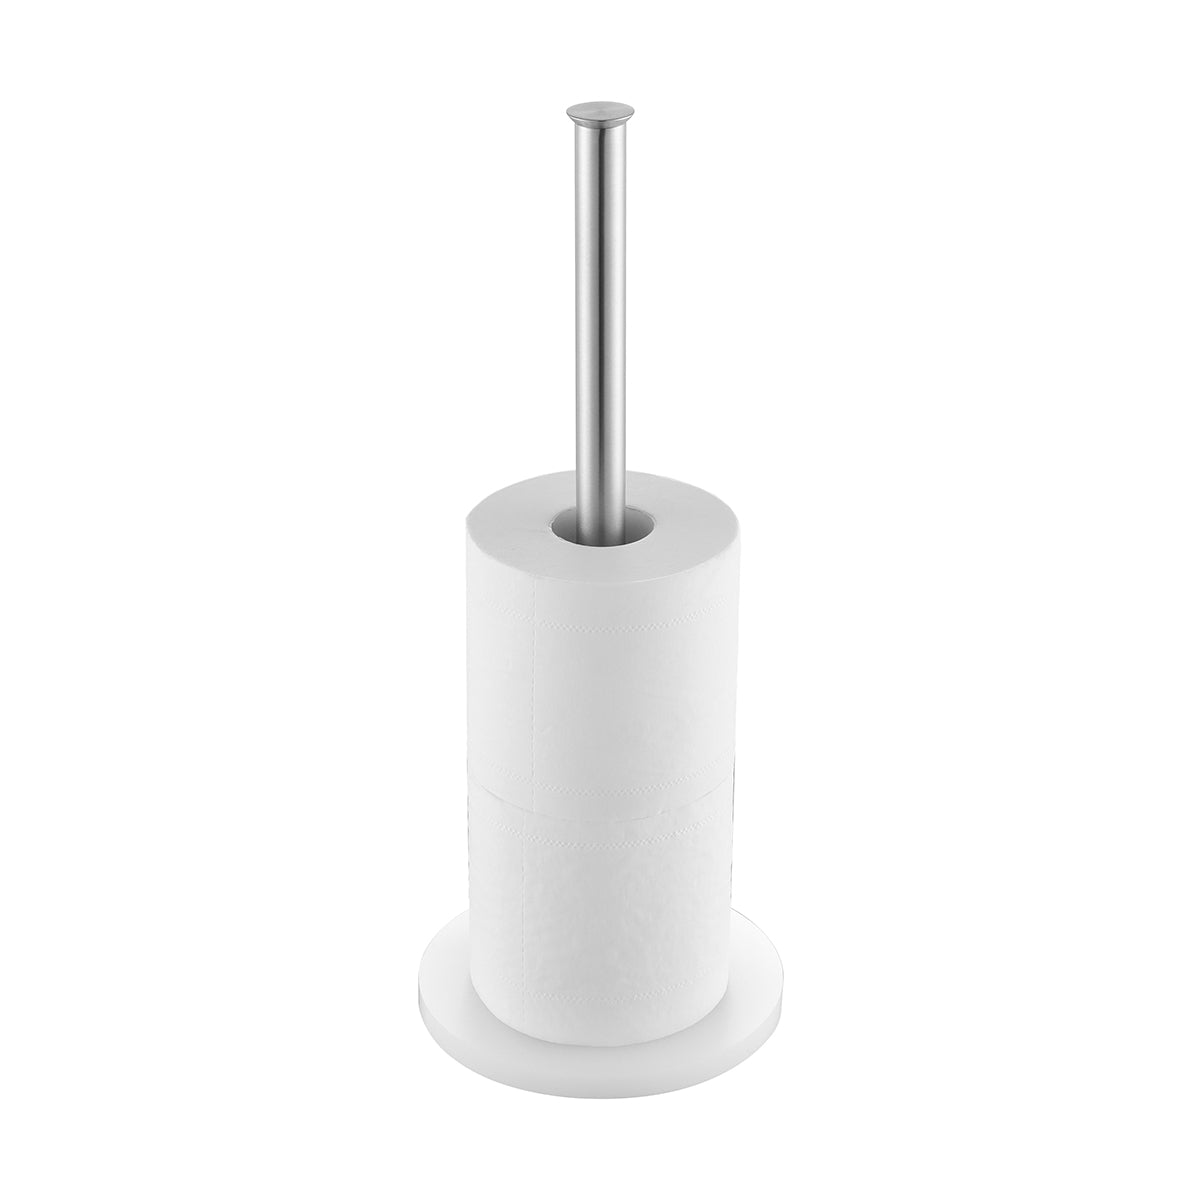 JS Jackson Supplies Freestanding Toilet Paper Holder Canister for Large and Extra Large Rolls, Size: One size, White